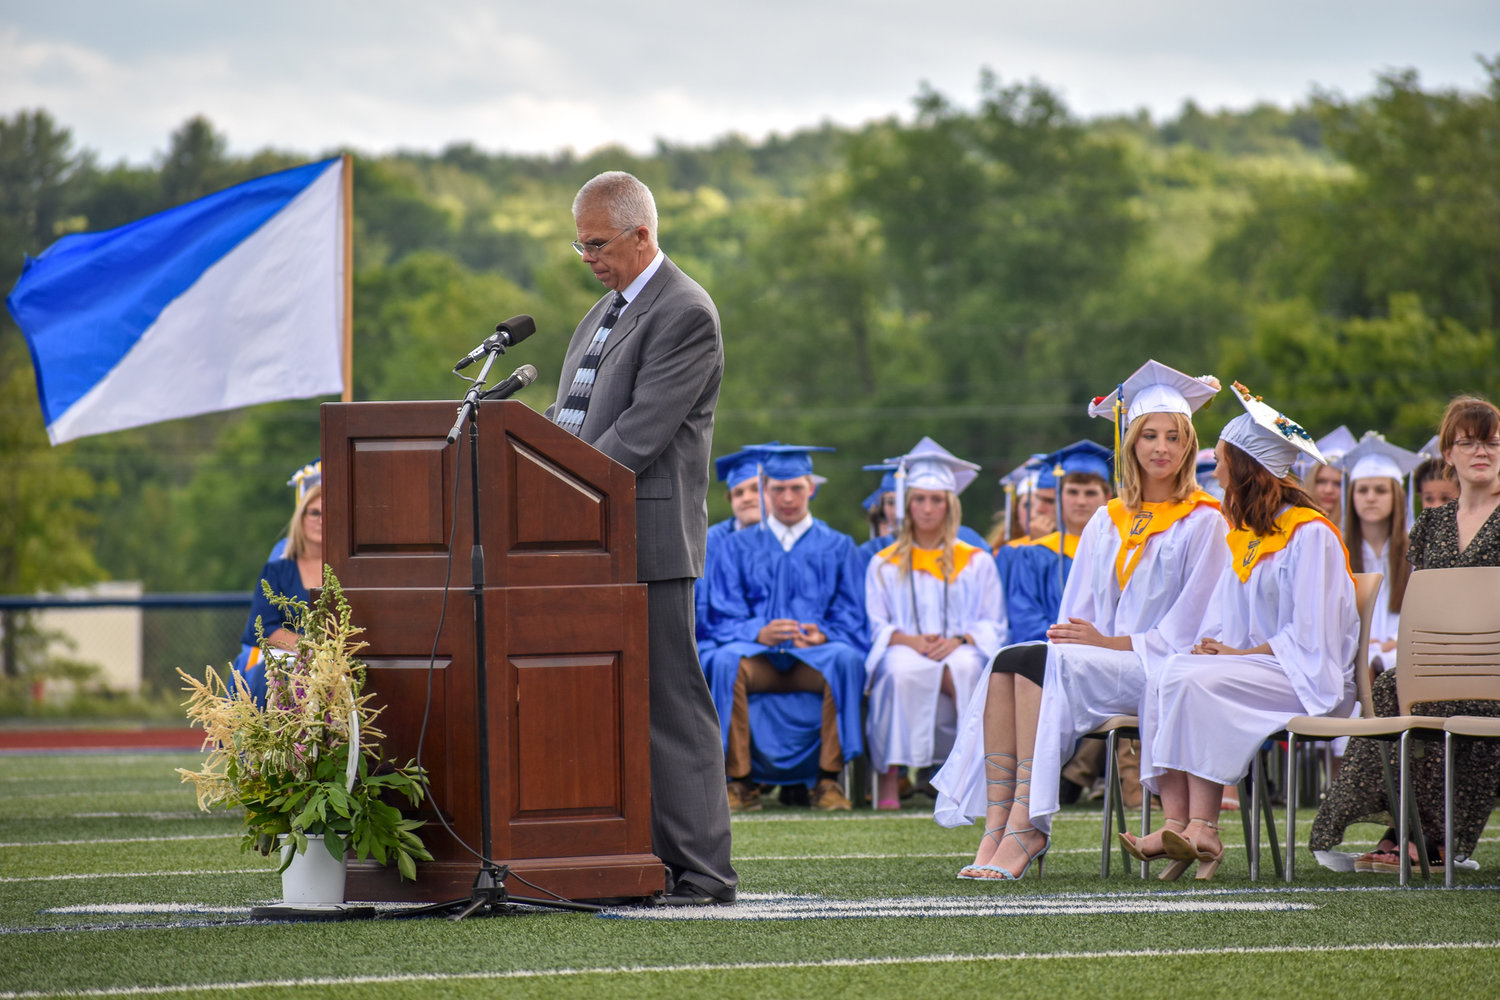 Camden High School Principal Christopher Centner shared some remarks for the graduating class.